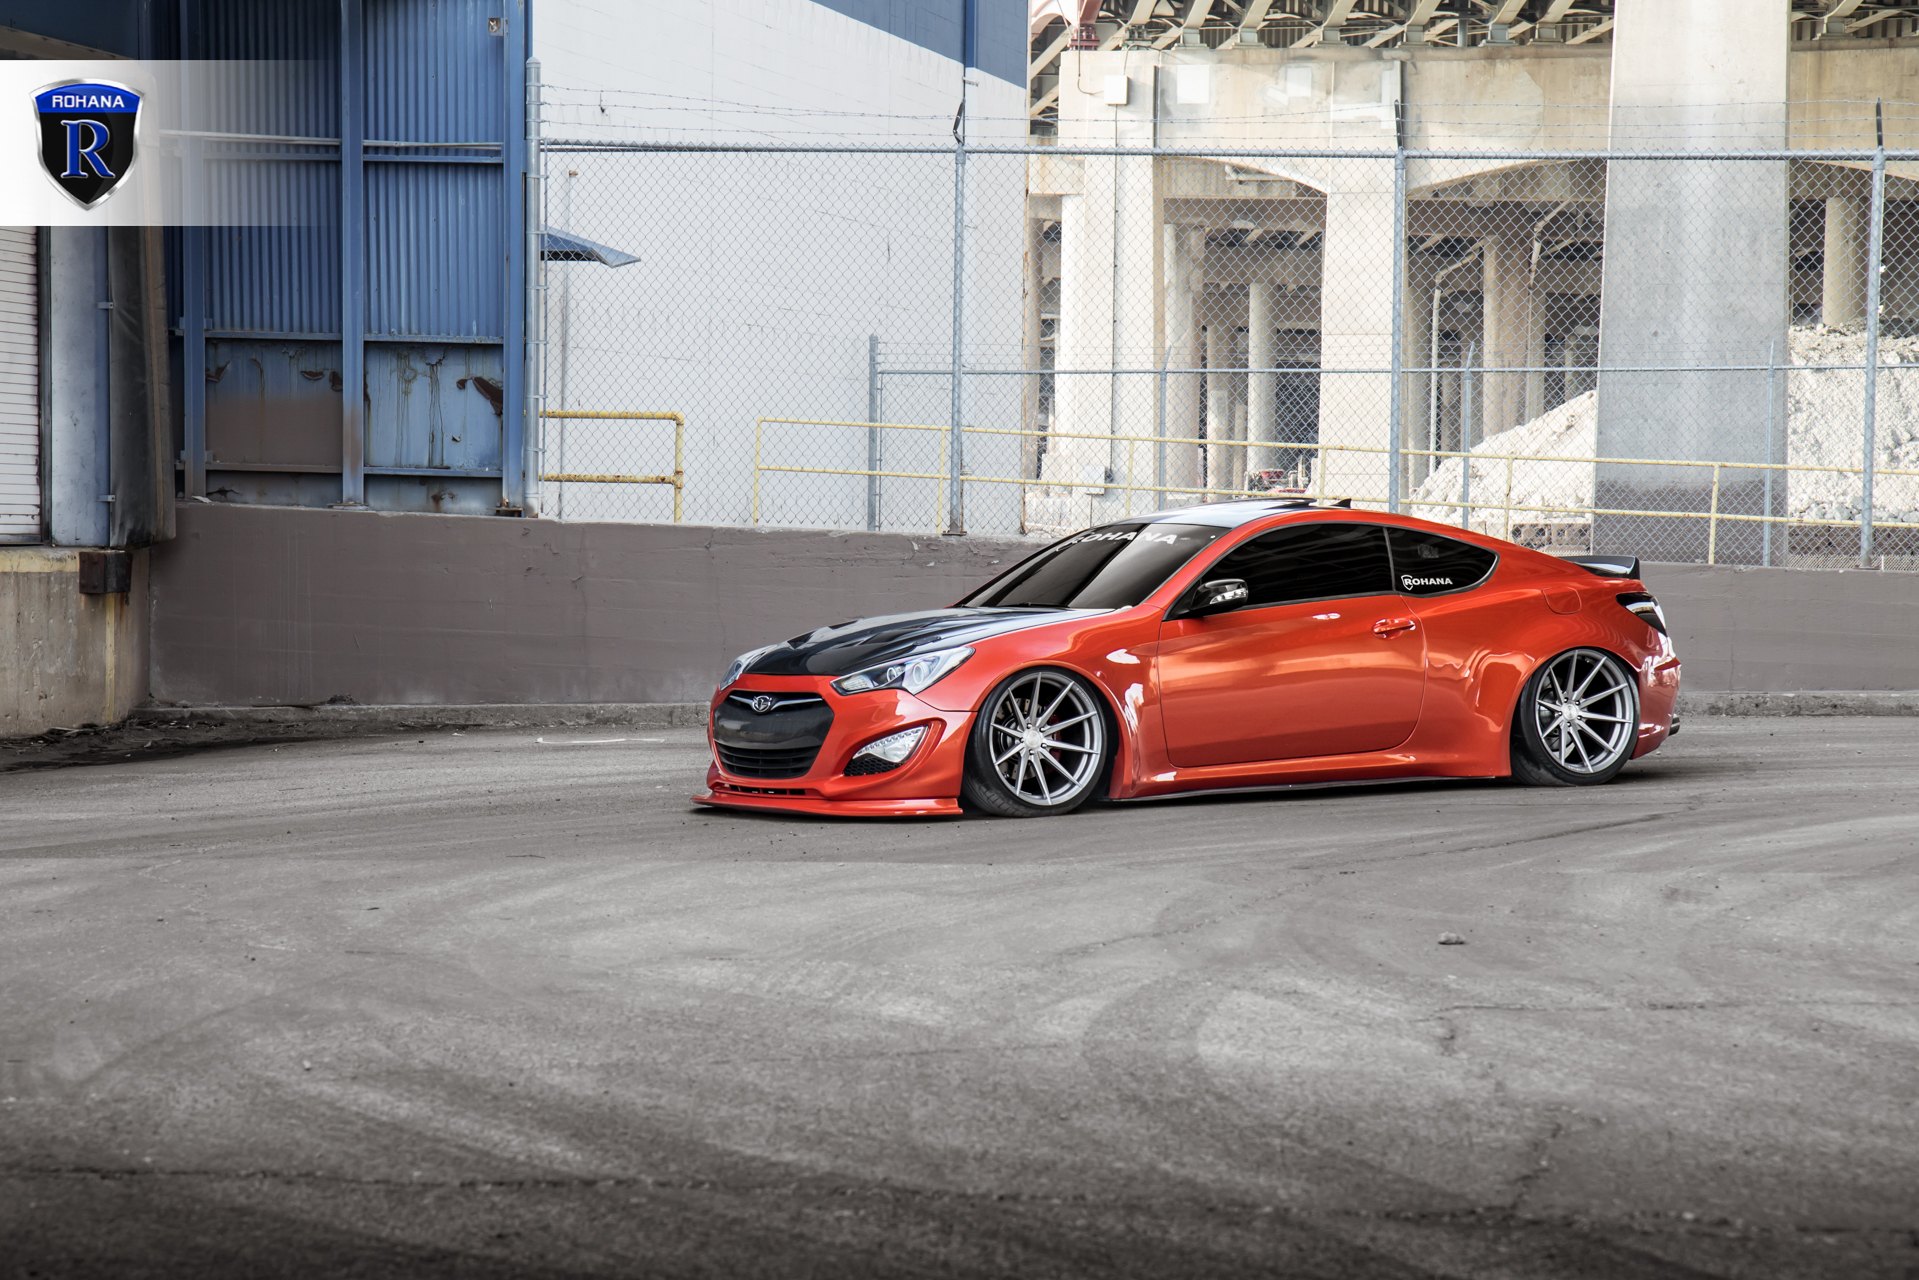 Red Hyundai Genesis Coupe with Aftermarket Halo Headlights - Photo by Rohana Wheels